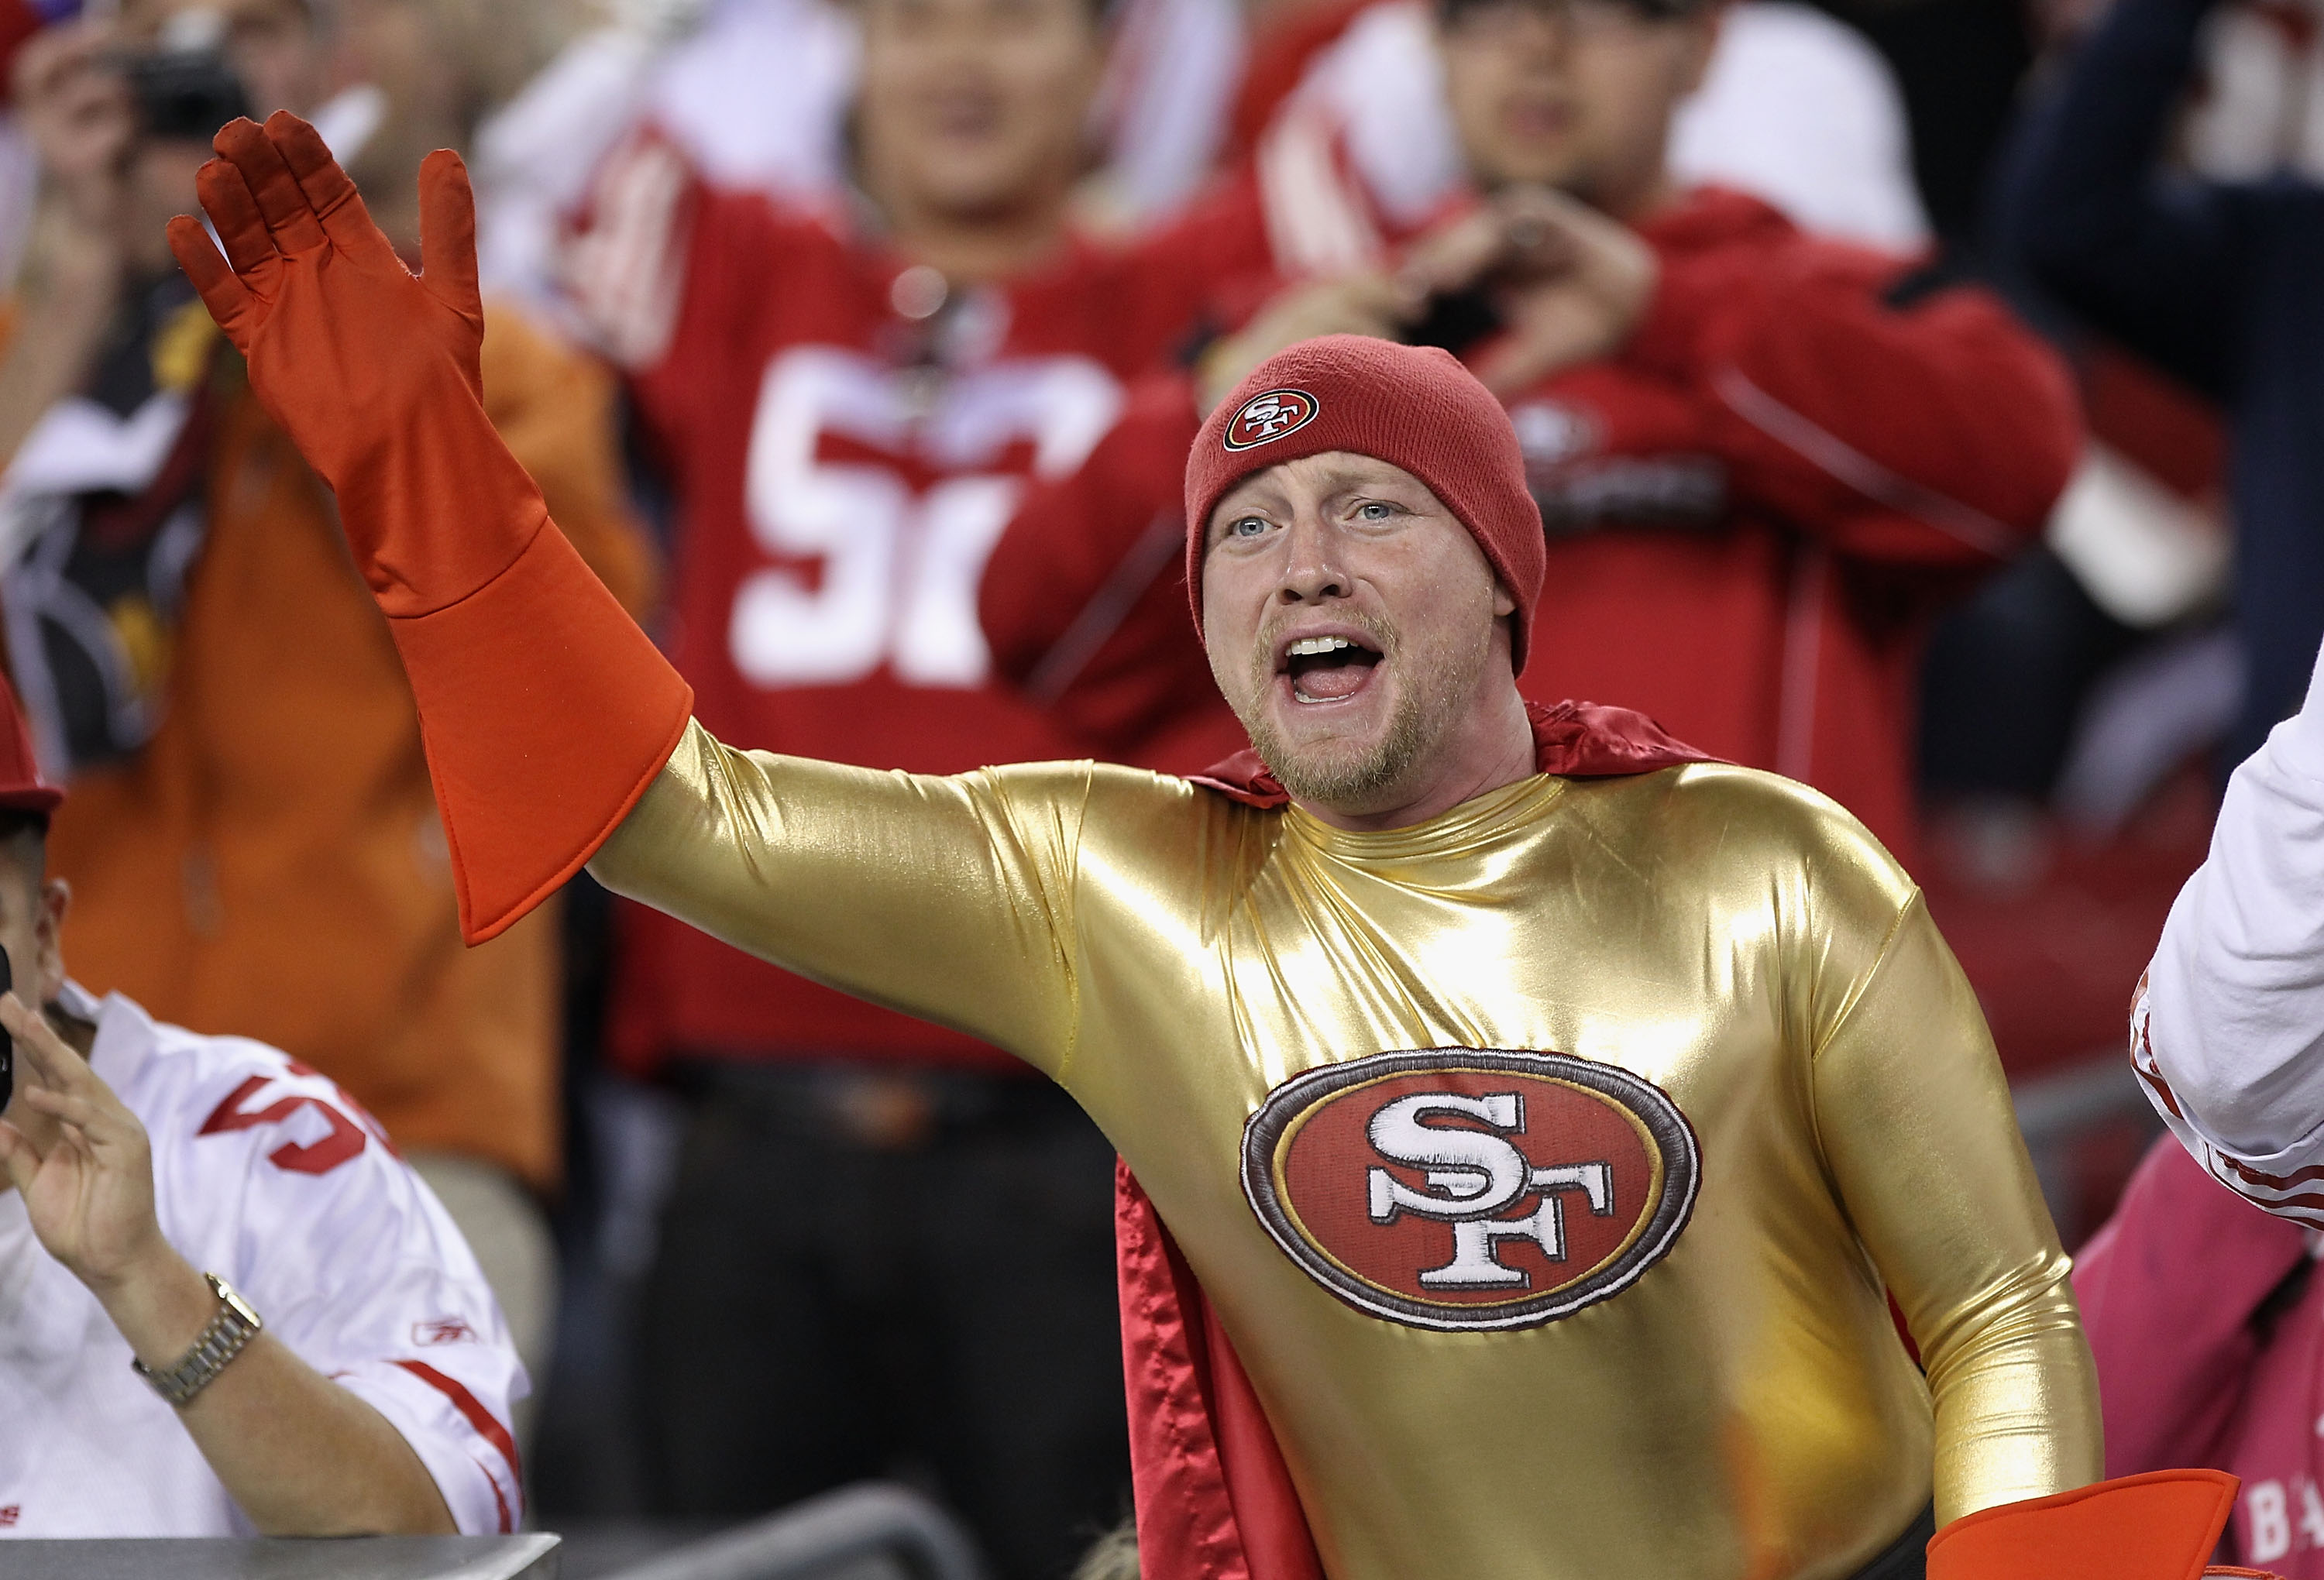 GLENDALE, AZ - NOVEMBER 29:  A fan of the San Francisco 49ers waves during the NFL game against the Arizona Cardinals at the University of Phoenix Stadium on November 29, 2010 in Glendale, Arizona.  (Photo by Christian Petersen/Getty Images)